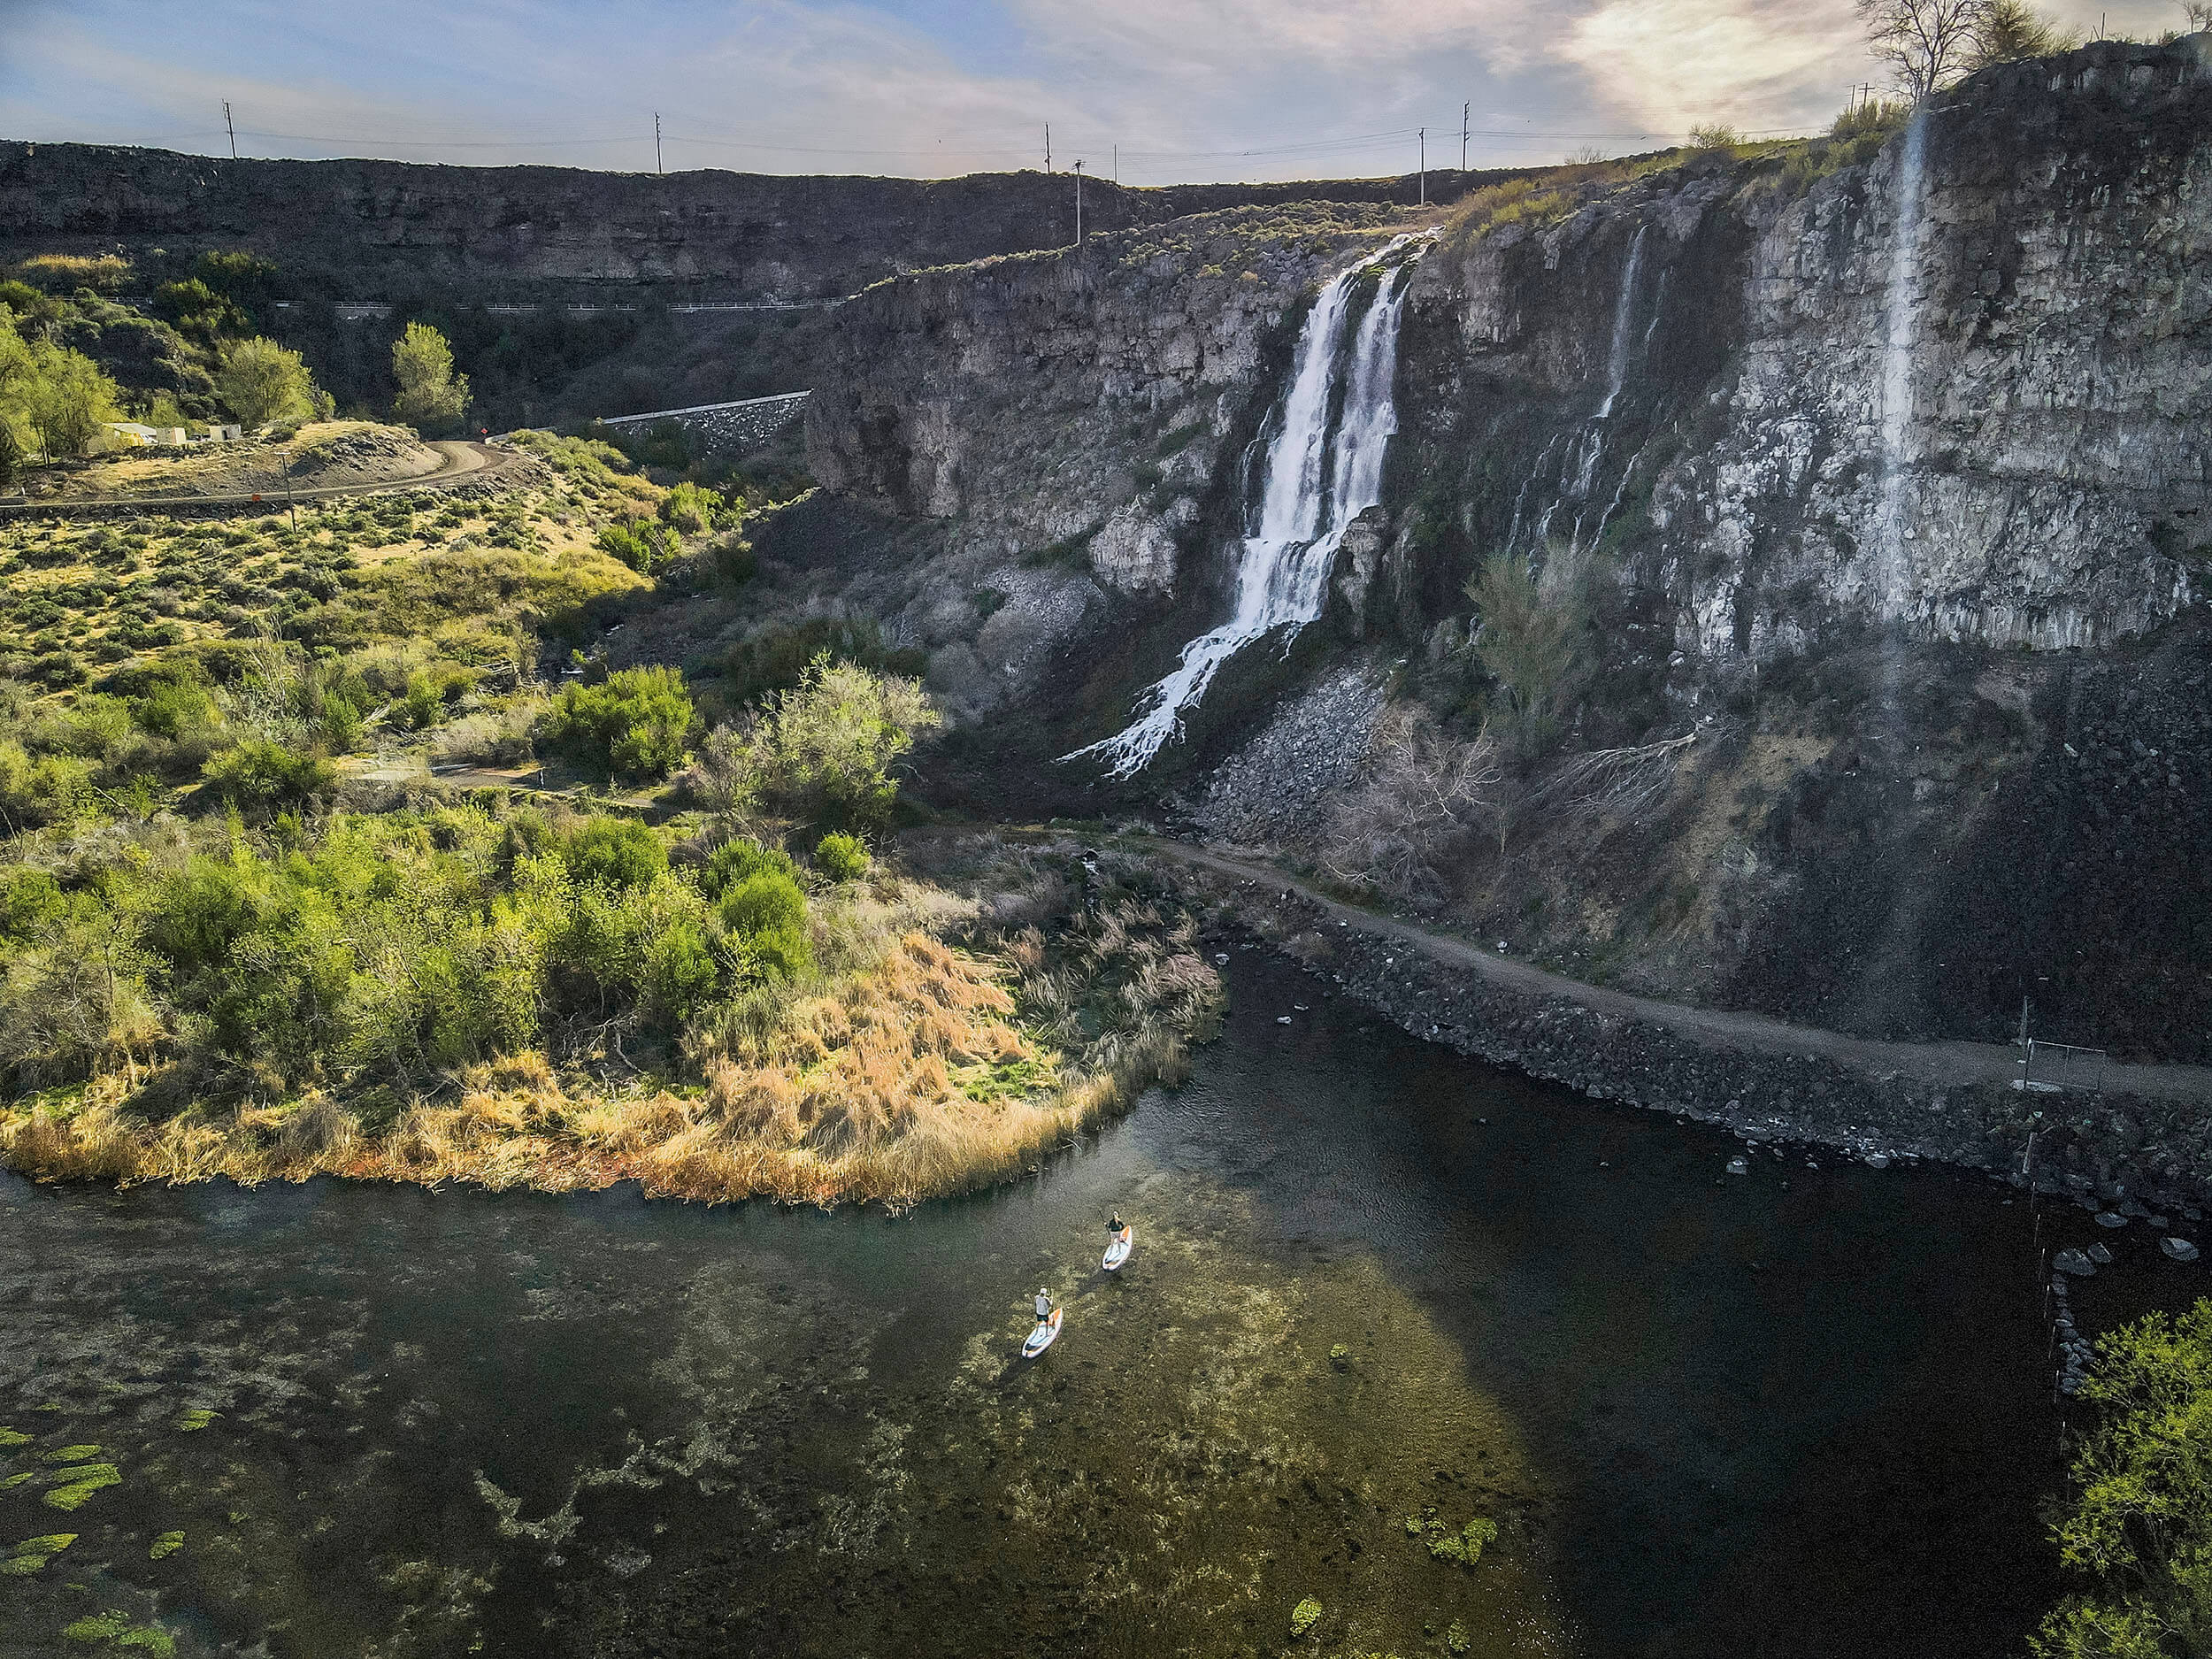 A bird's-eye view of two people paddle boarding on white paddle boards below a waterfall.